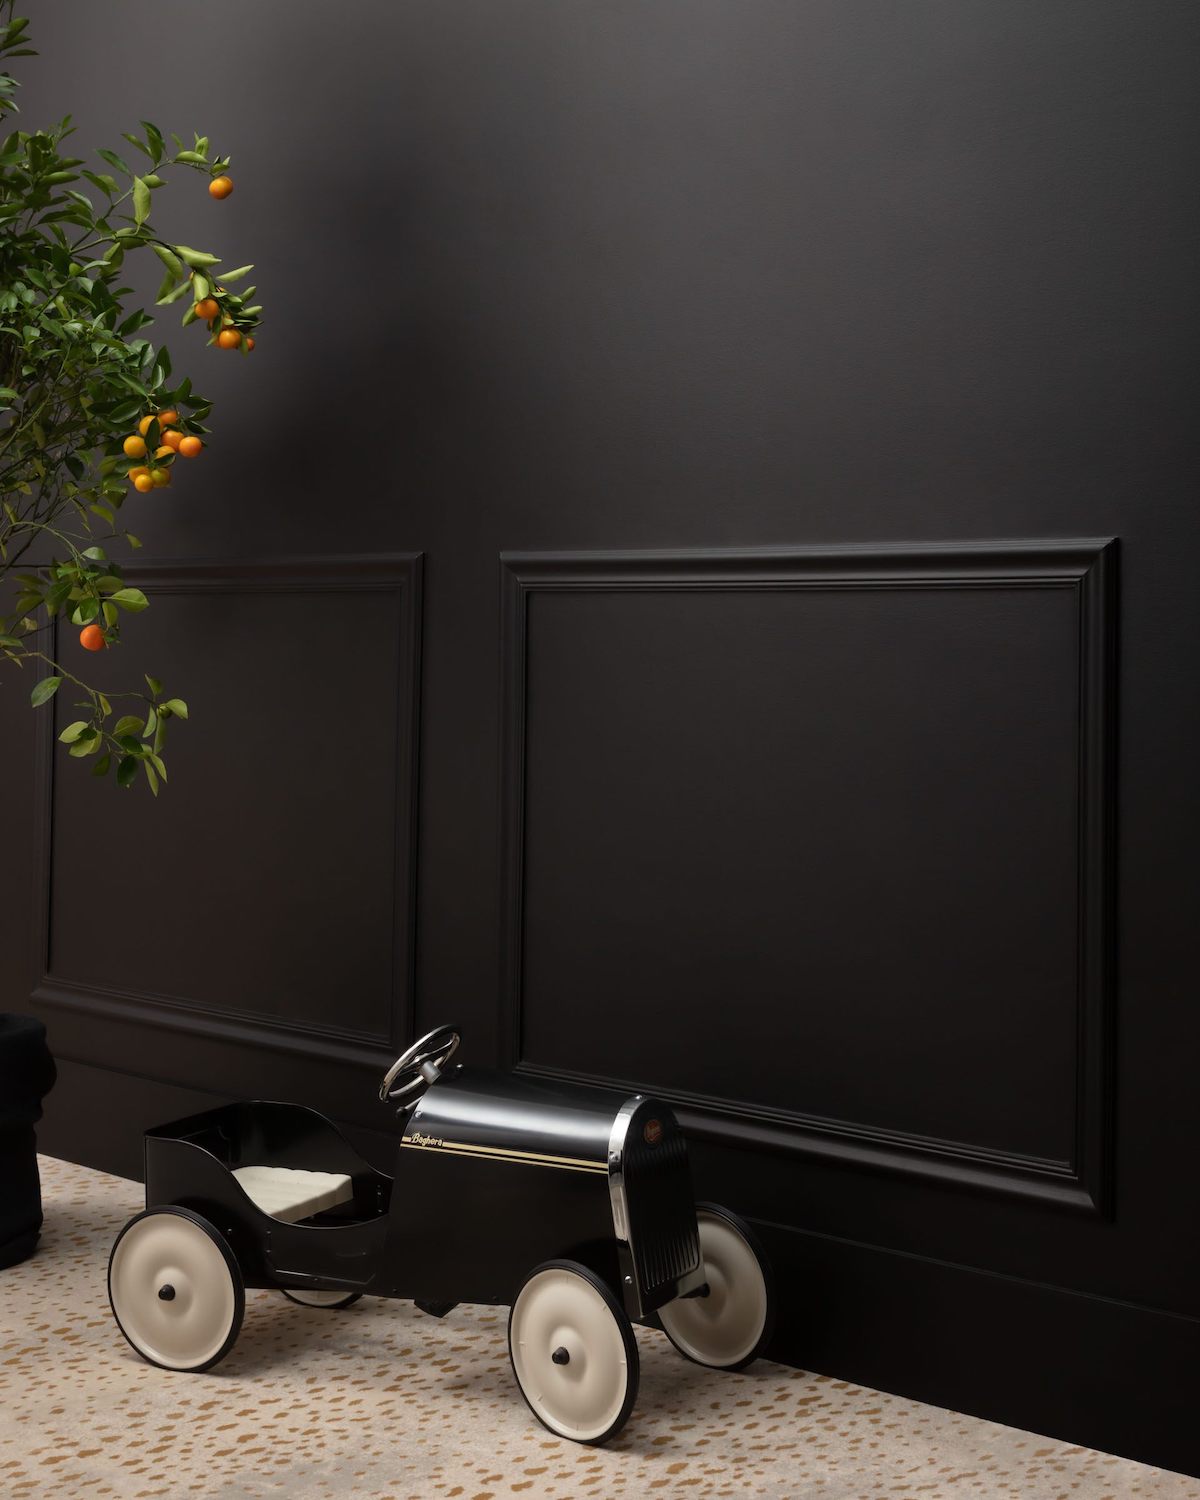 BM Black wall with neutral color carpet and little kids toy